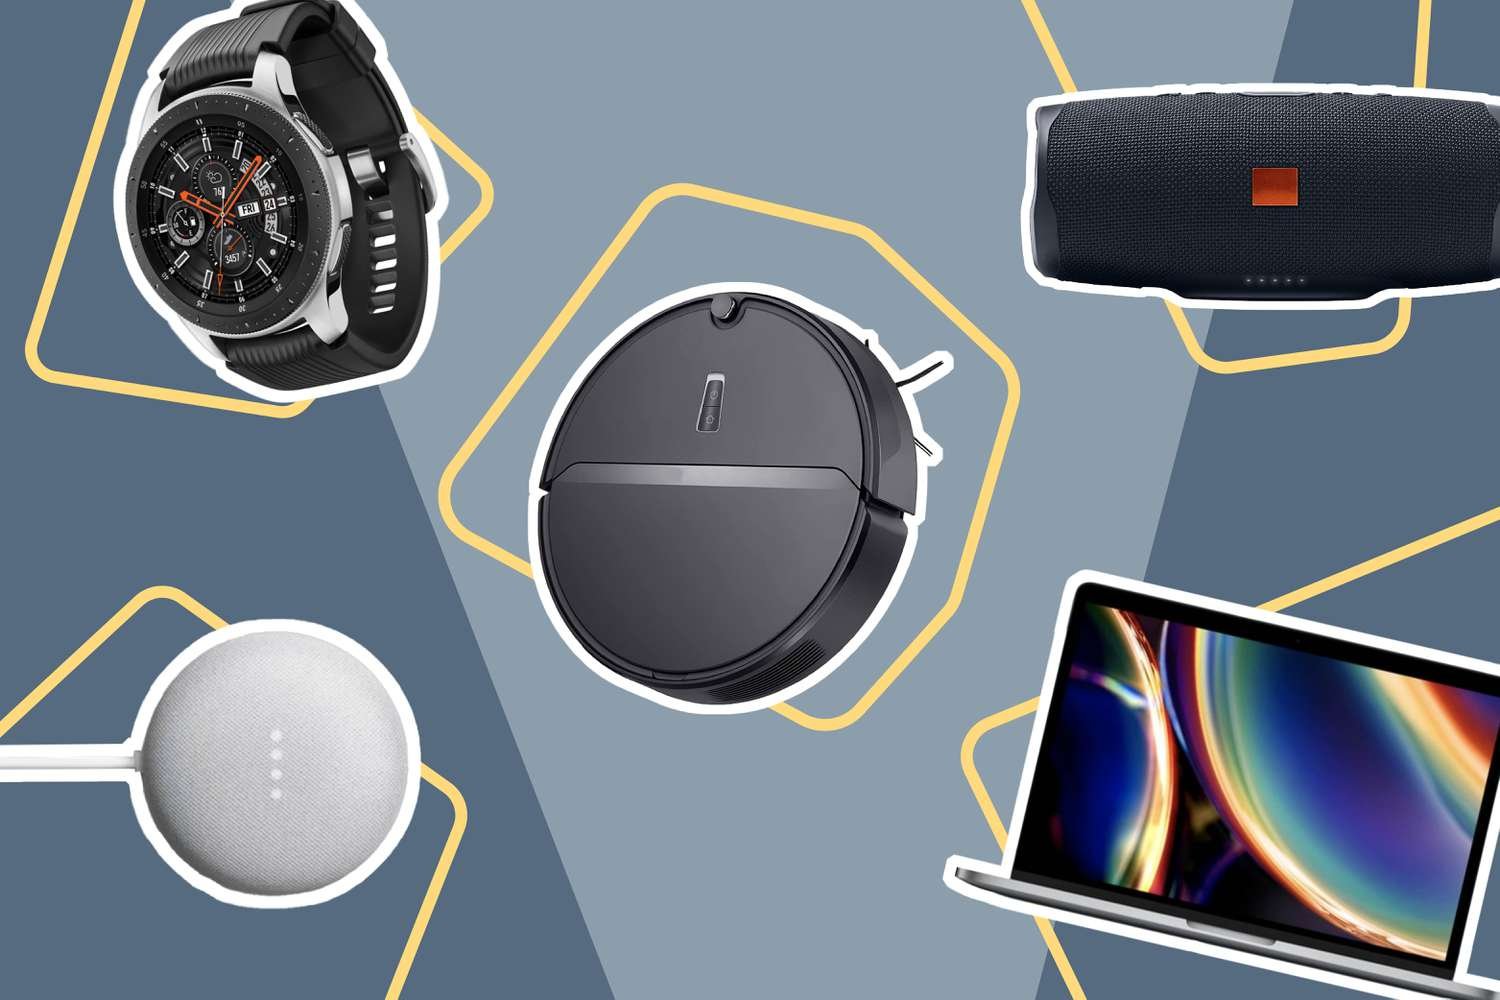 The Best Black Friday Deals of 2022